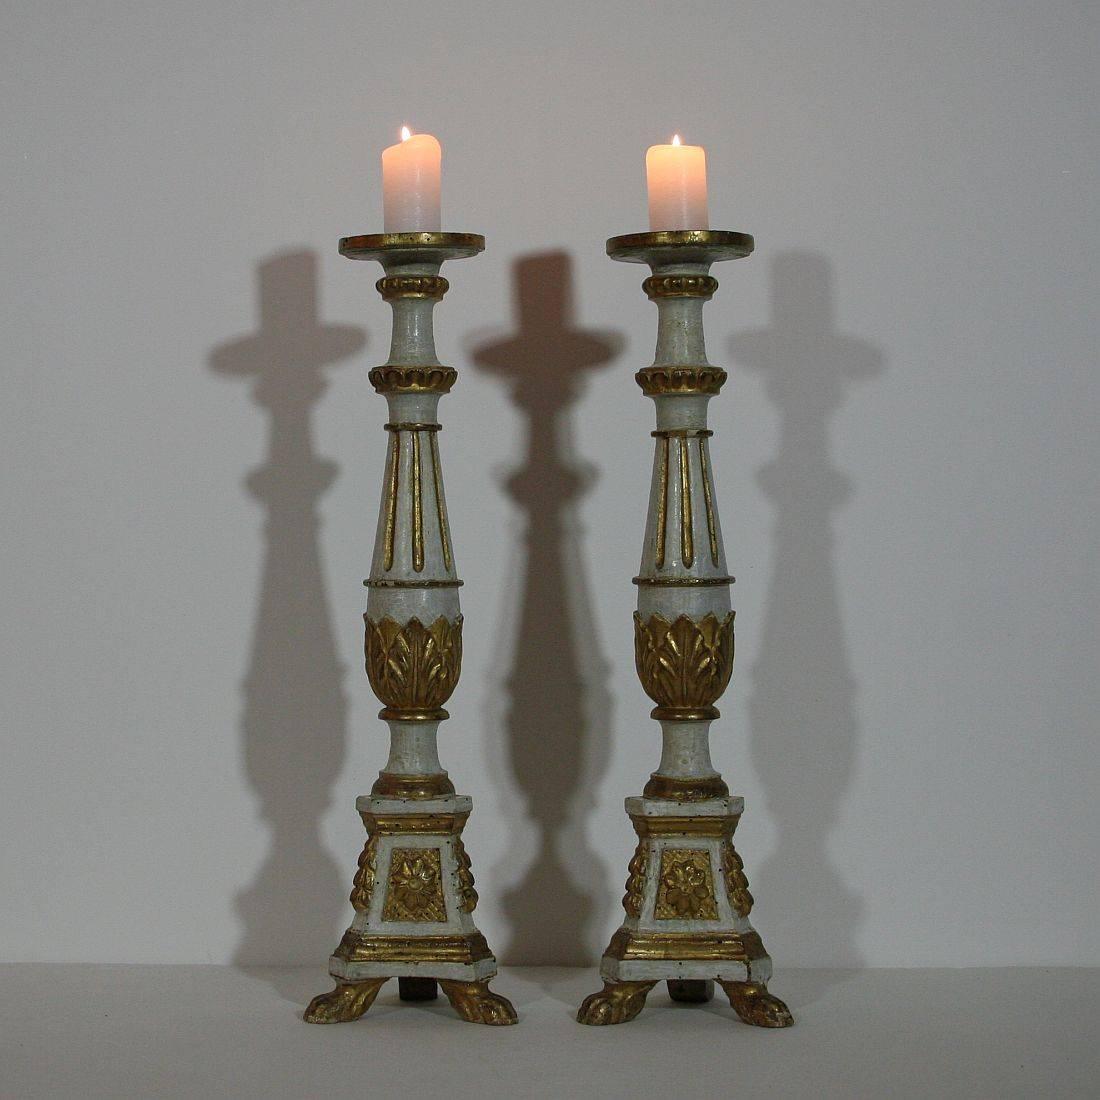 Beautiful pair of two neoclassical Louis XVI style candlesticks with their original gilding, Italy, circa 1780. Weathered, without peaks.